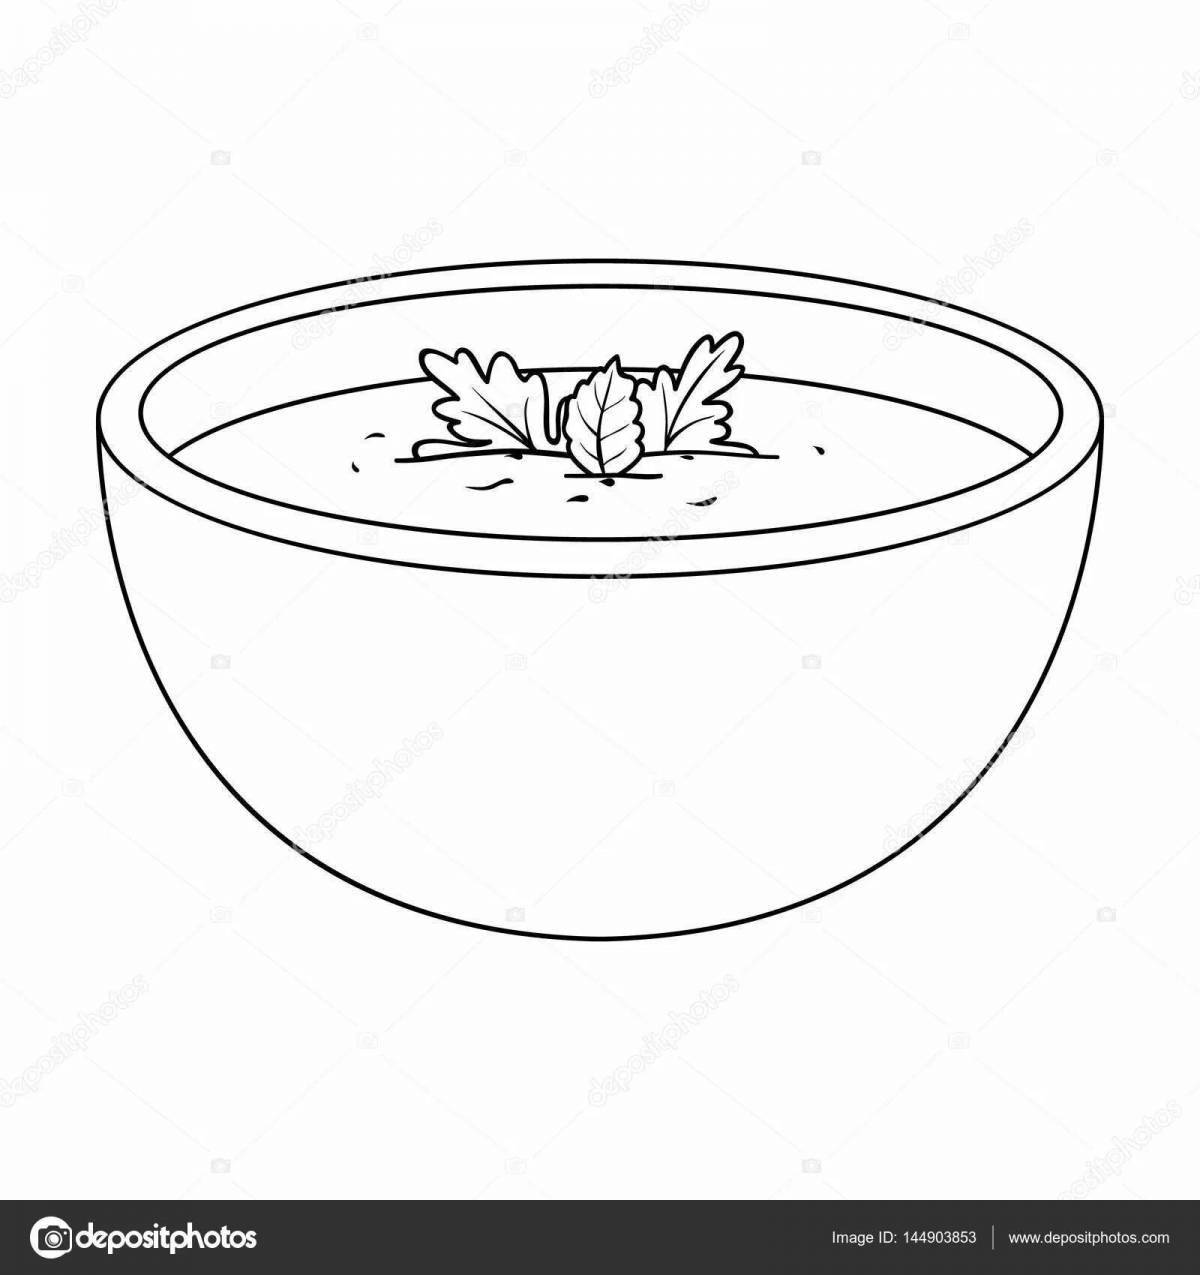 Colourful soup plate coloring page